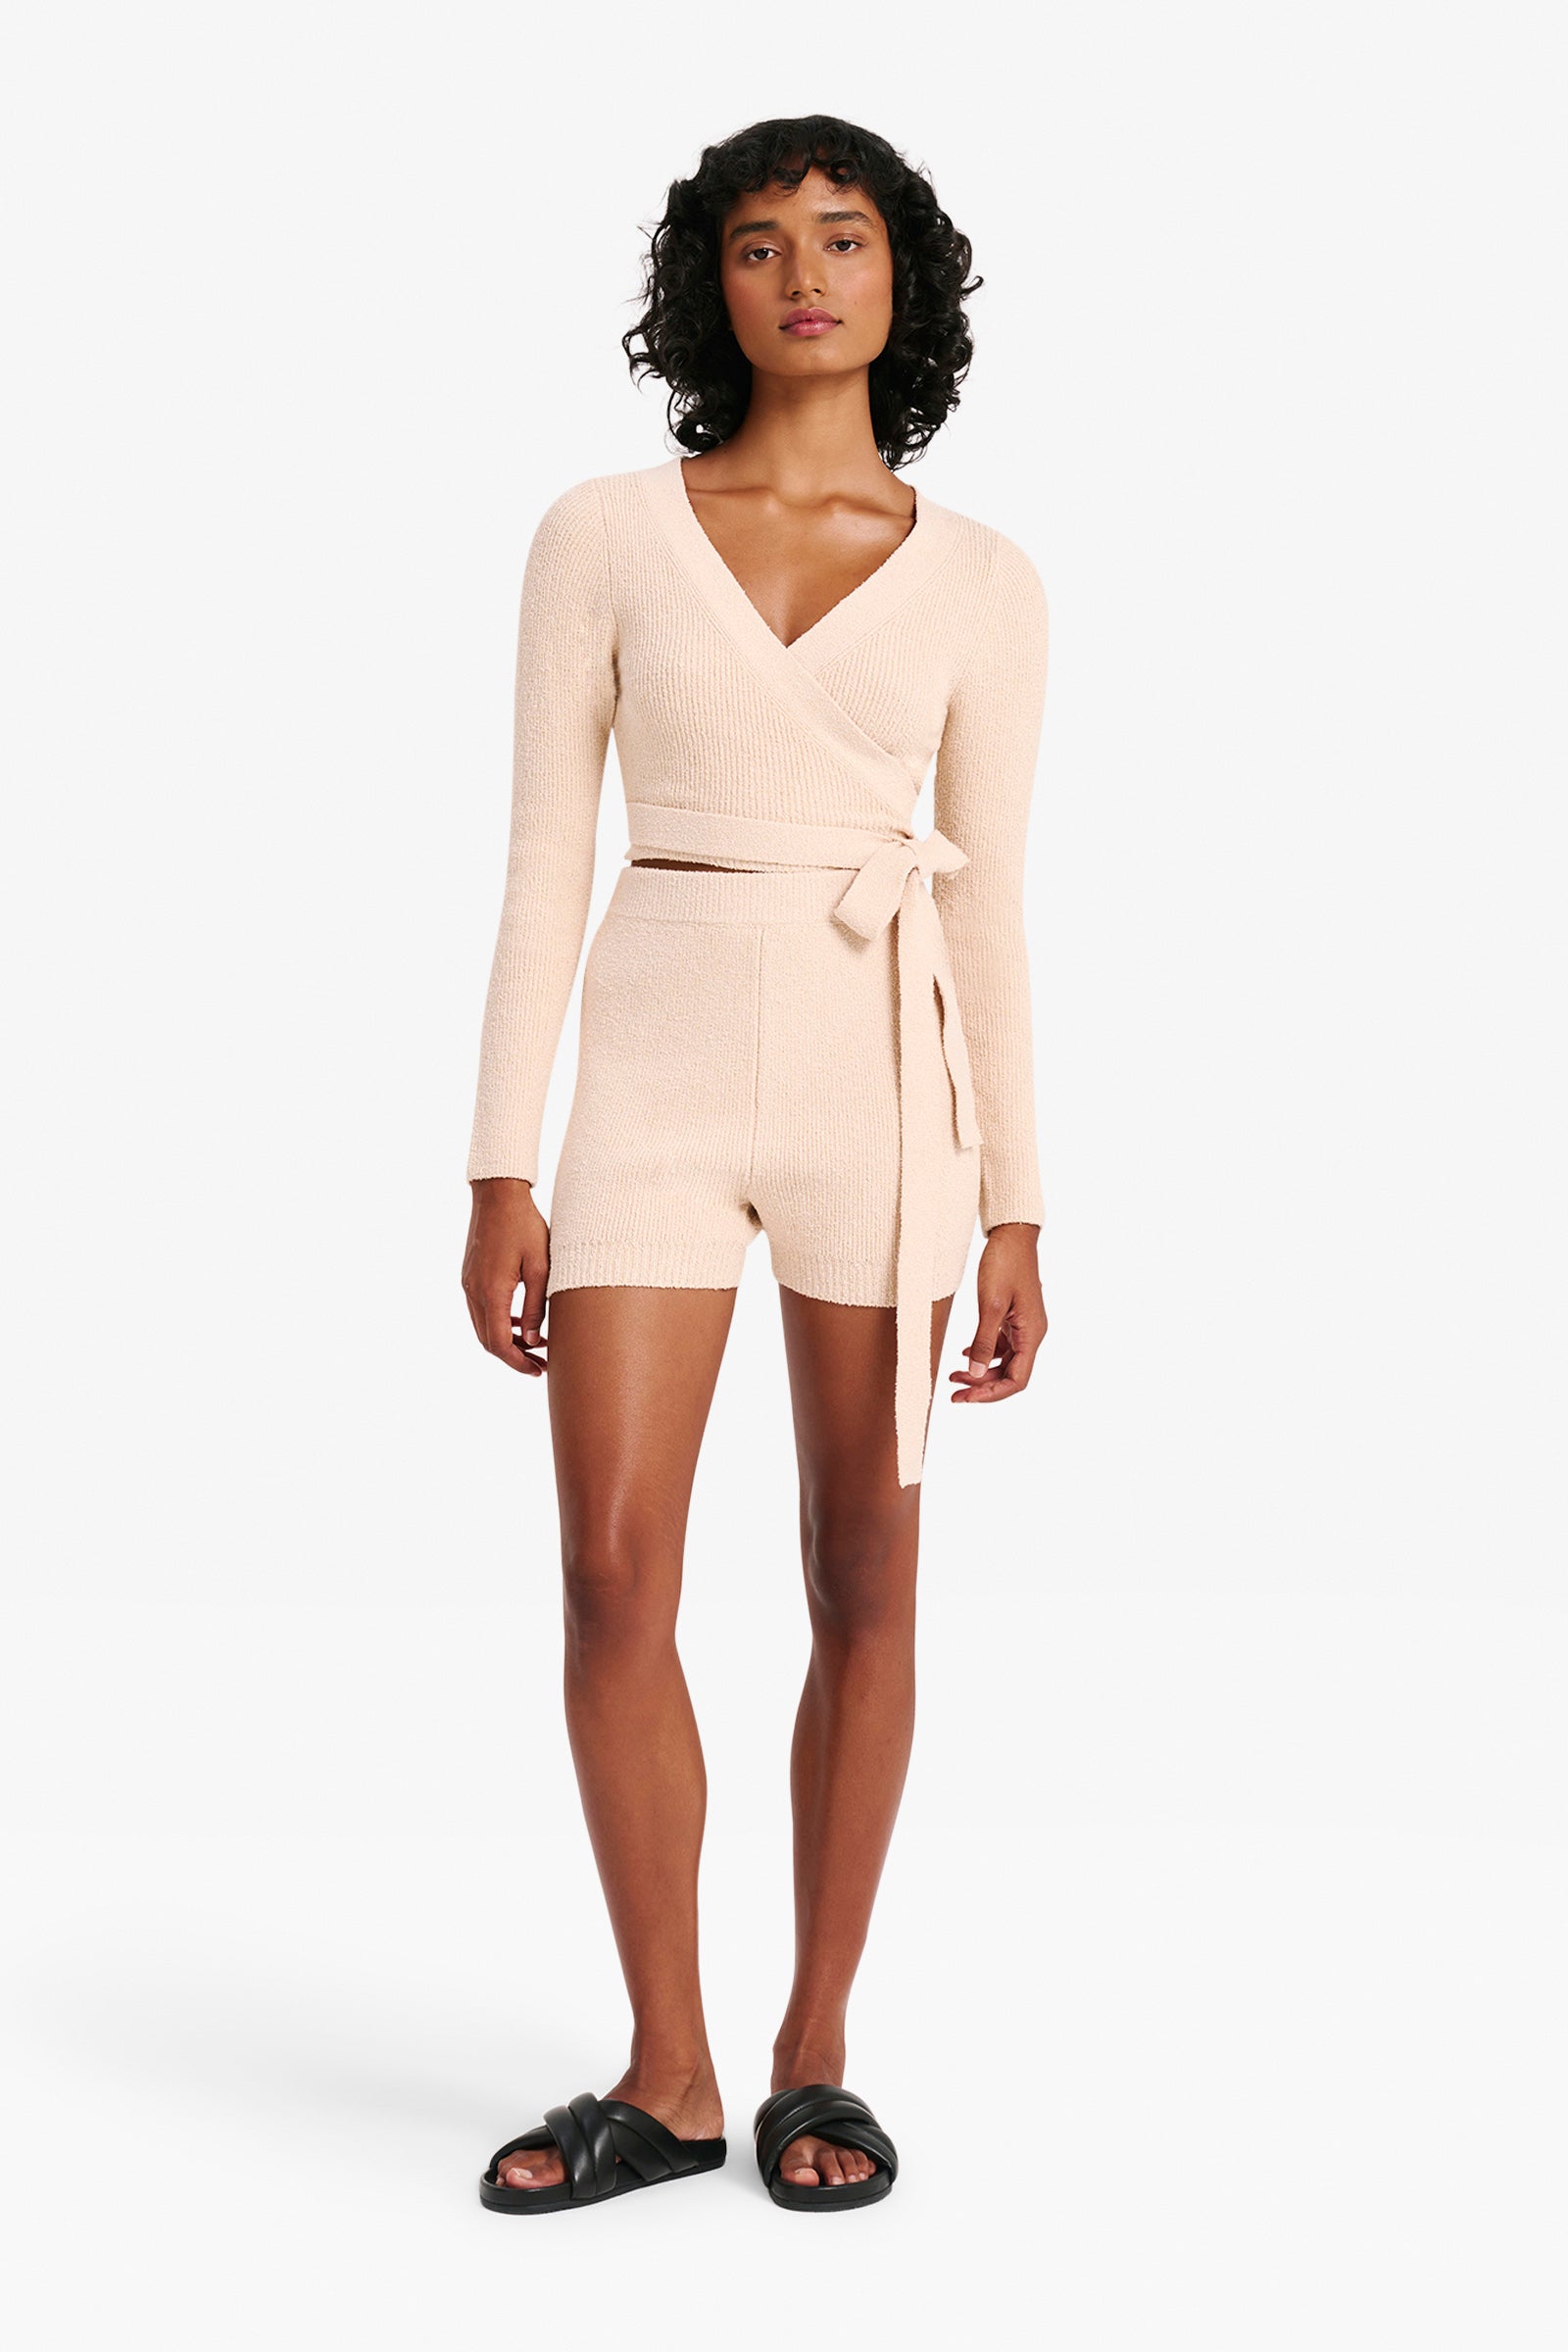 Nude Lucy Astro Knit Short in a Light Beige Oatmeal